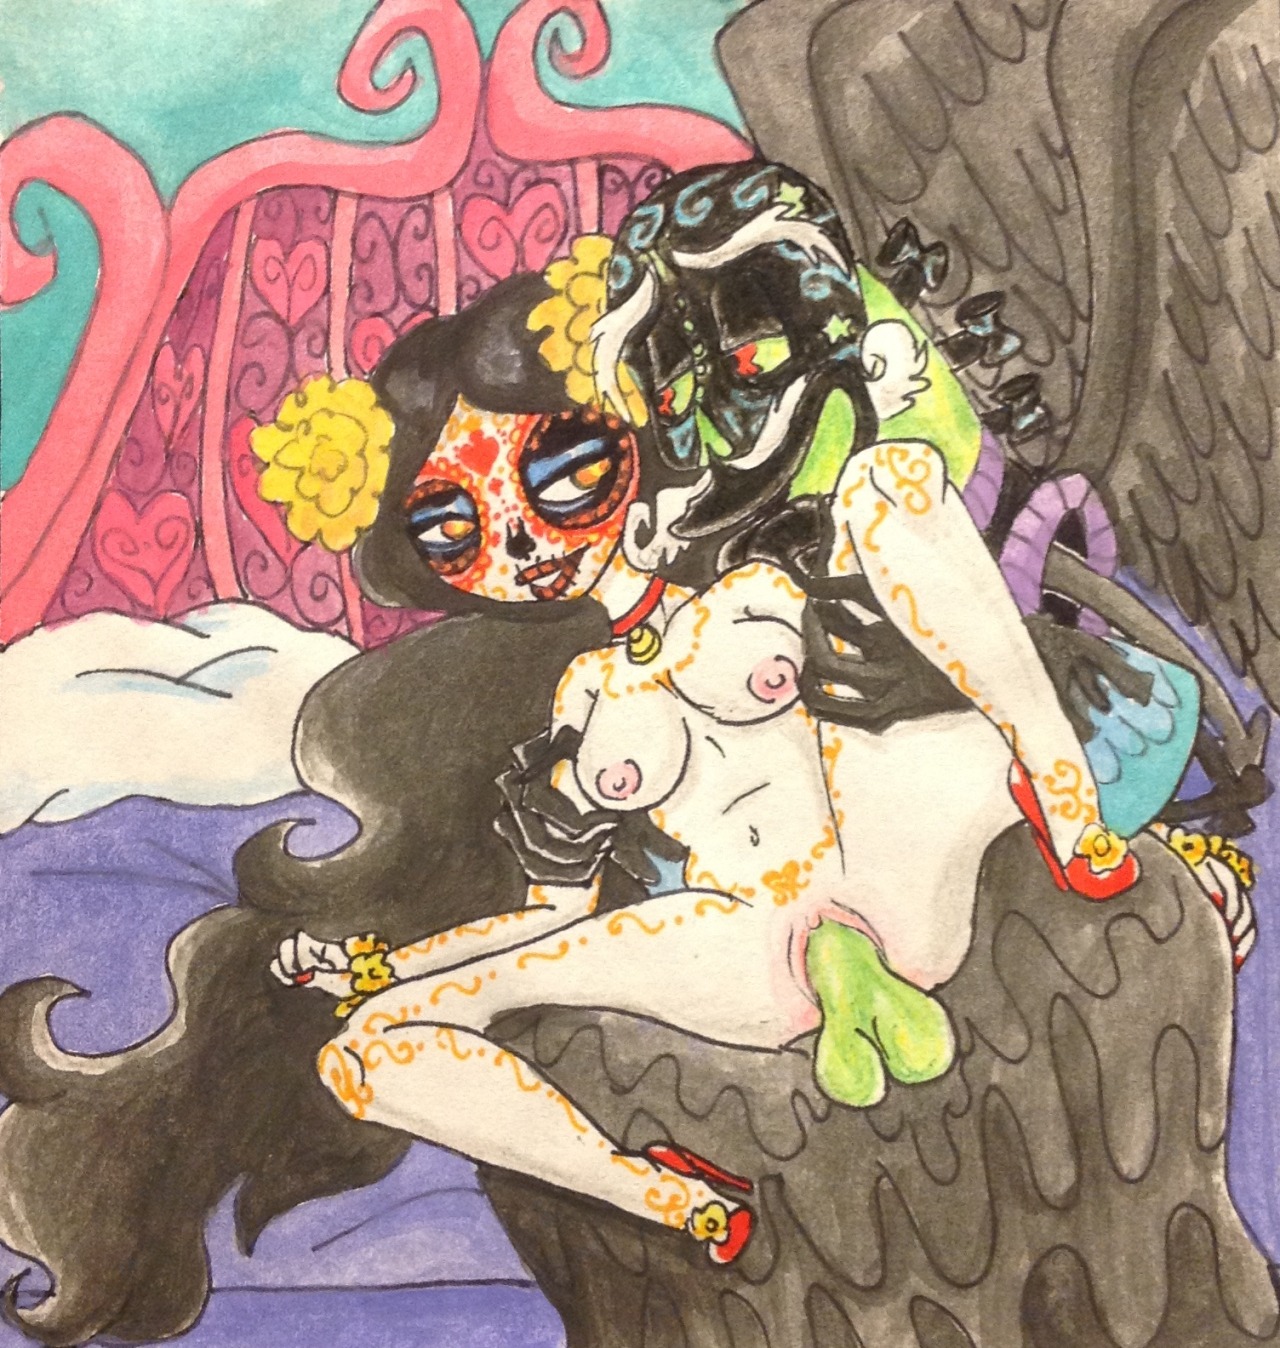 La Muerte and Xibalba  0/////0 Because…. they’re one of the hottest couples